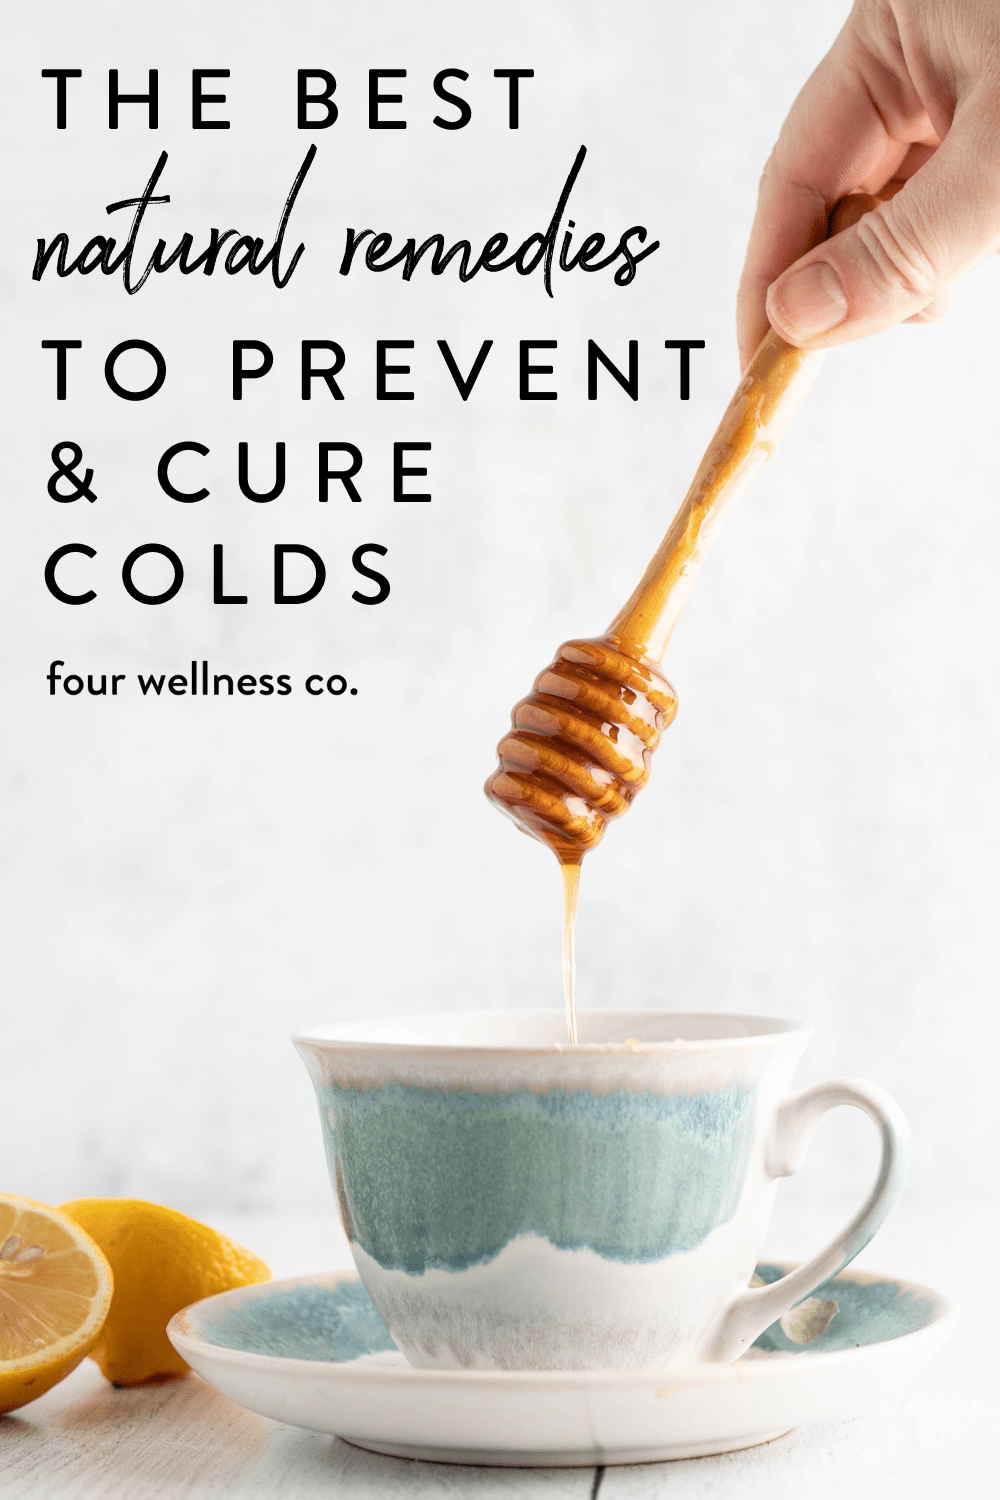 How to cure colds quickly